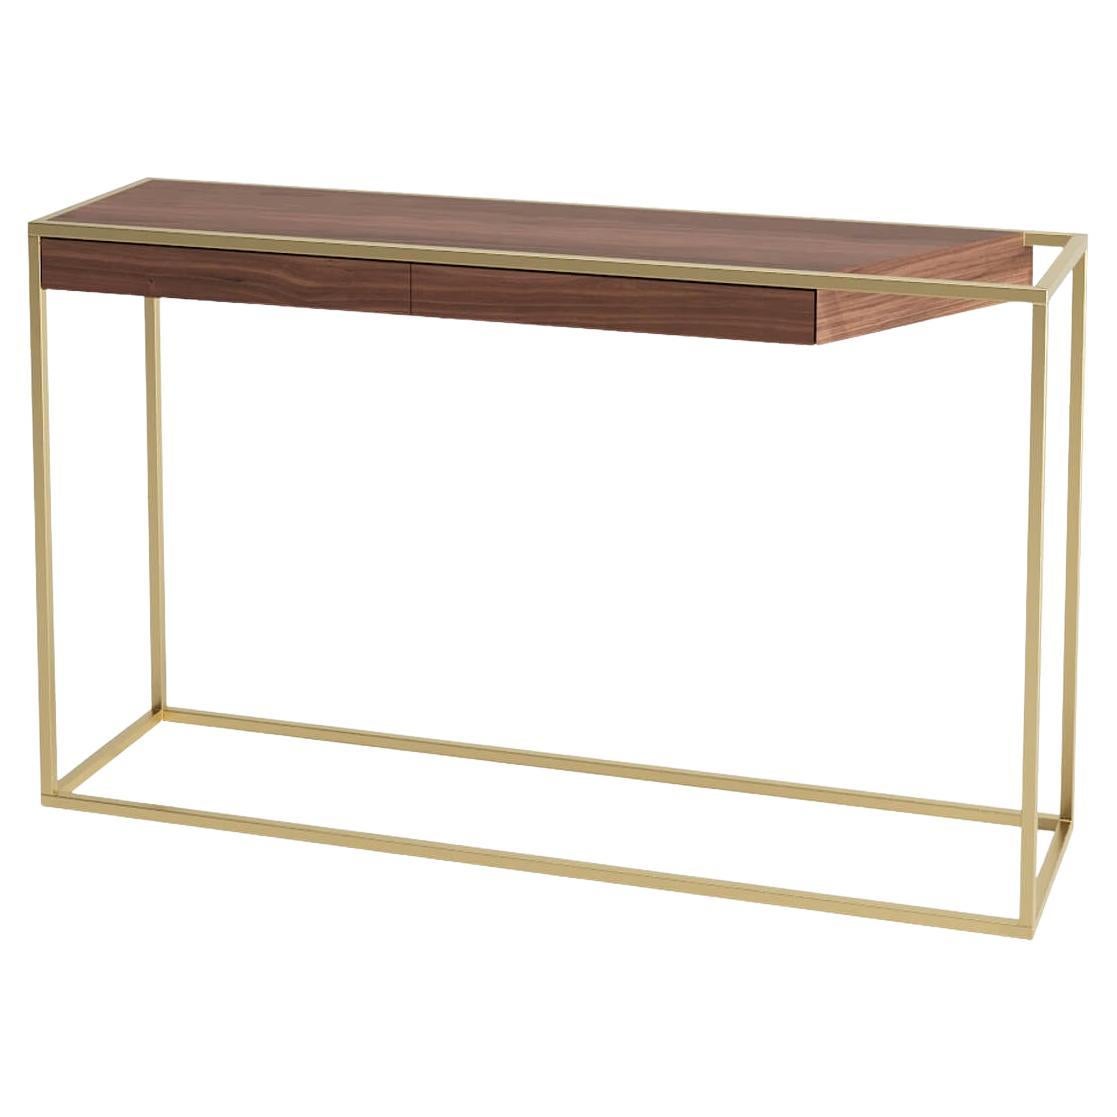 Modern Minimalist Rectangular Console Table Walnut Wood and Brushed Brass For Sale